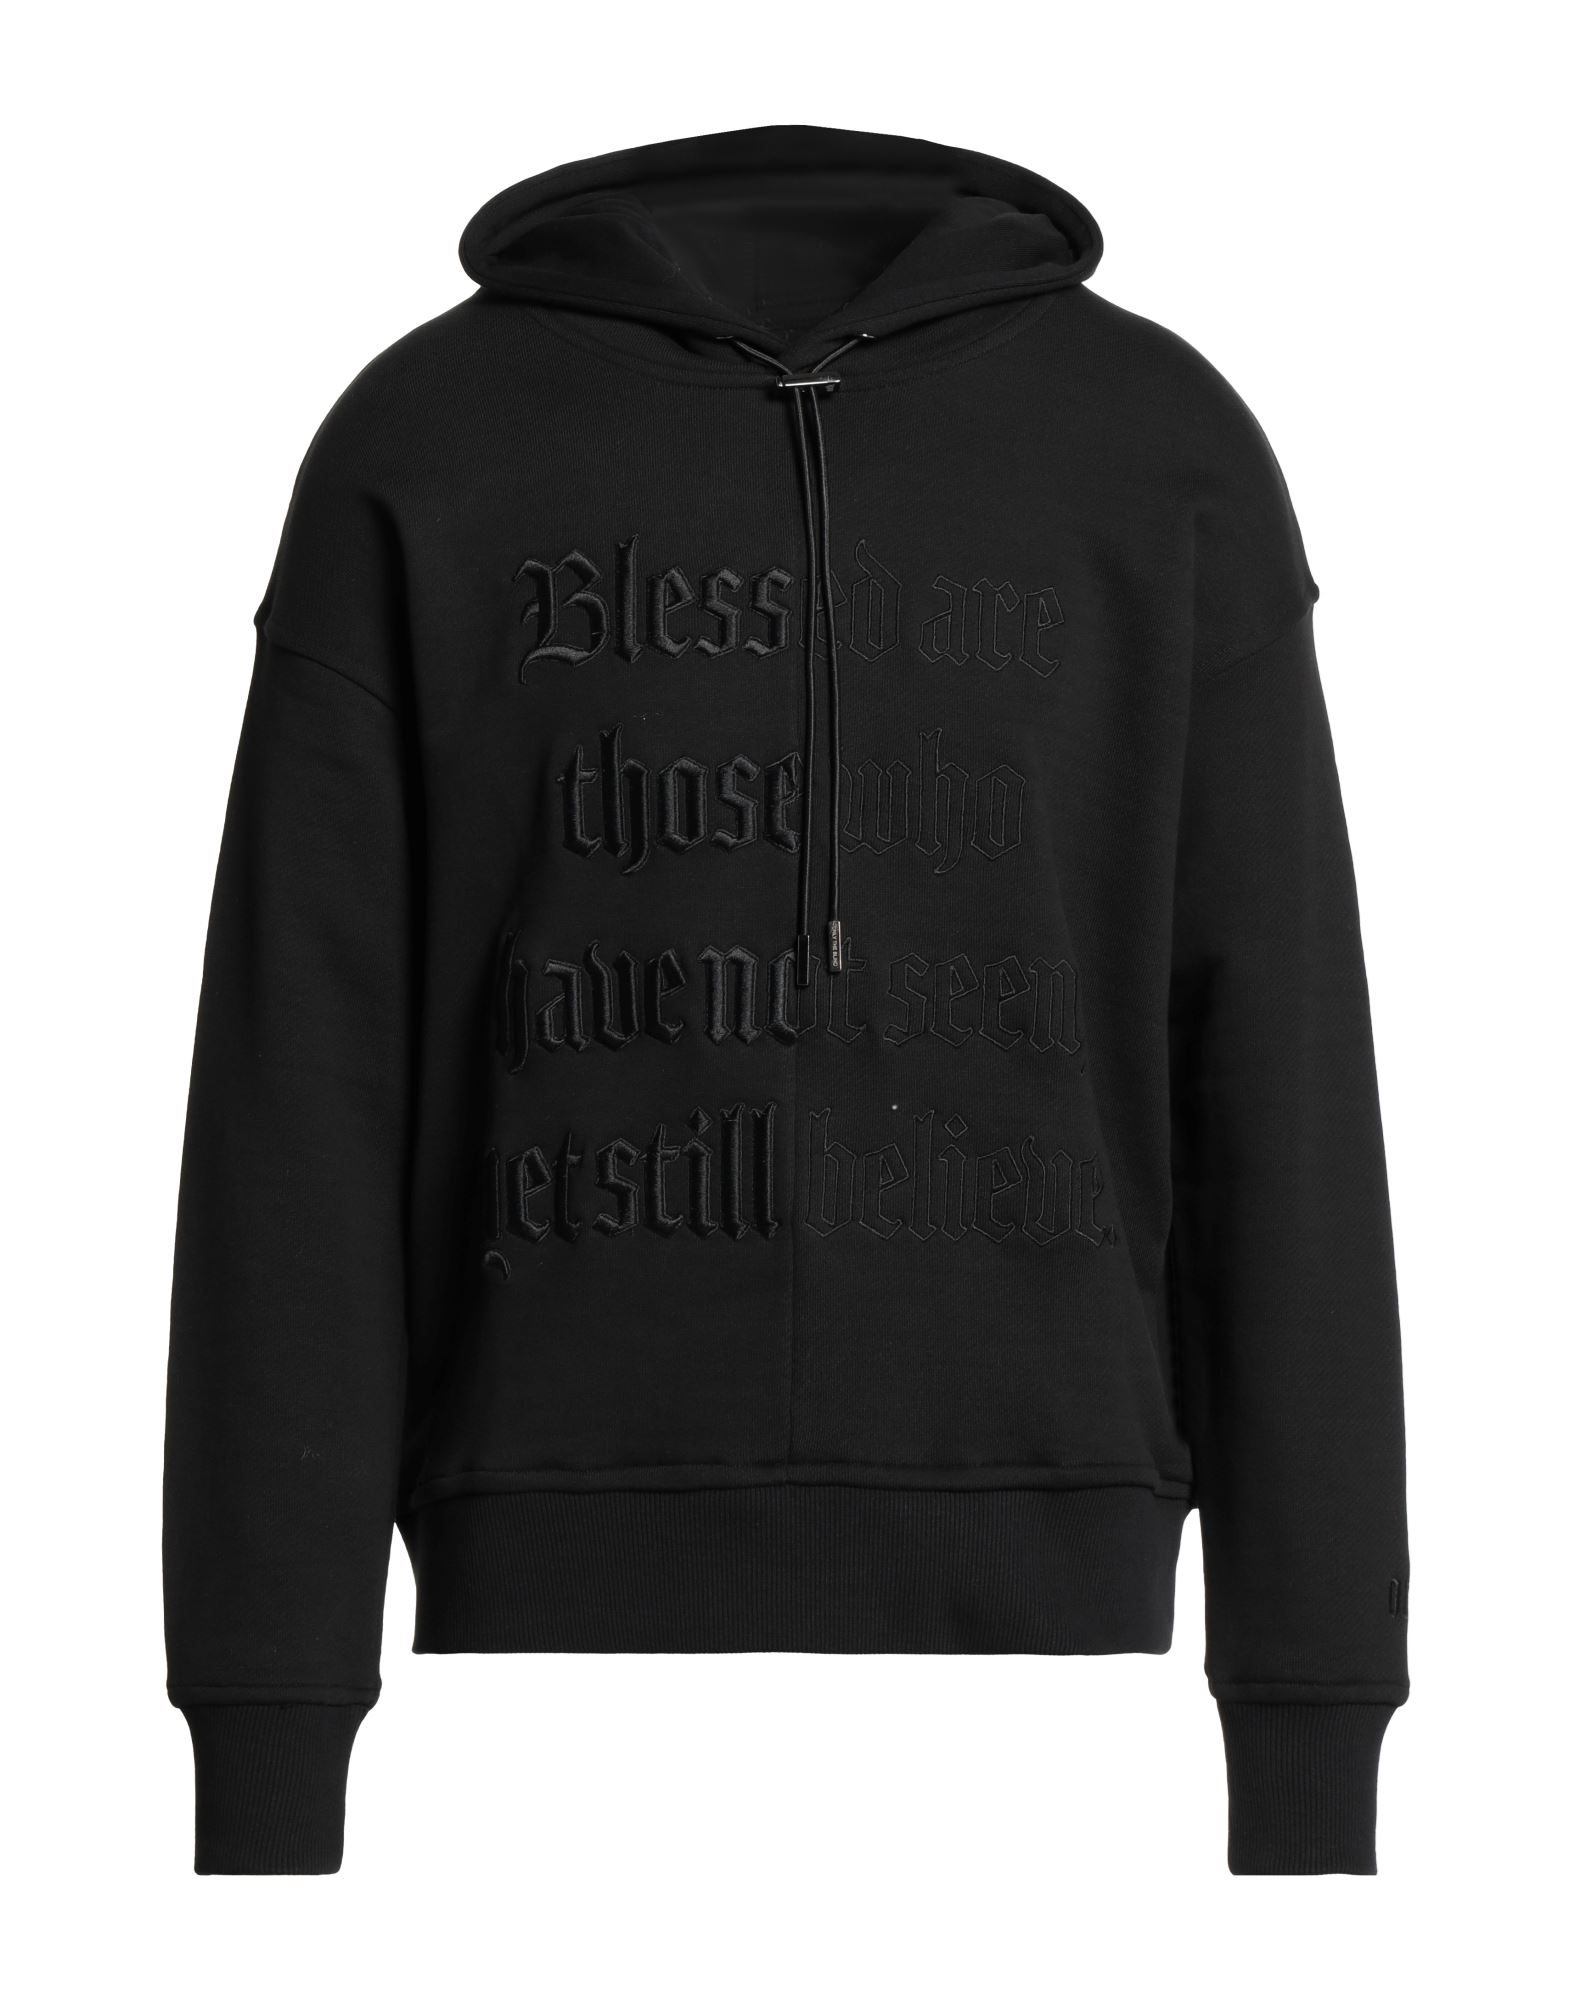 Only The Blind Sweatshirts In Black